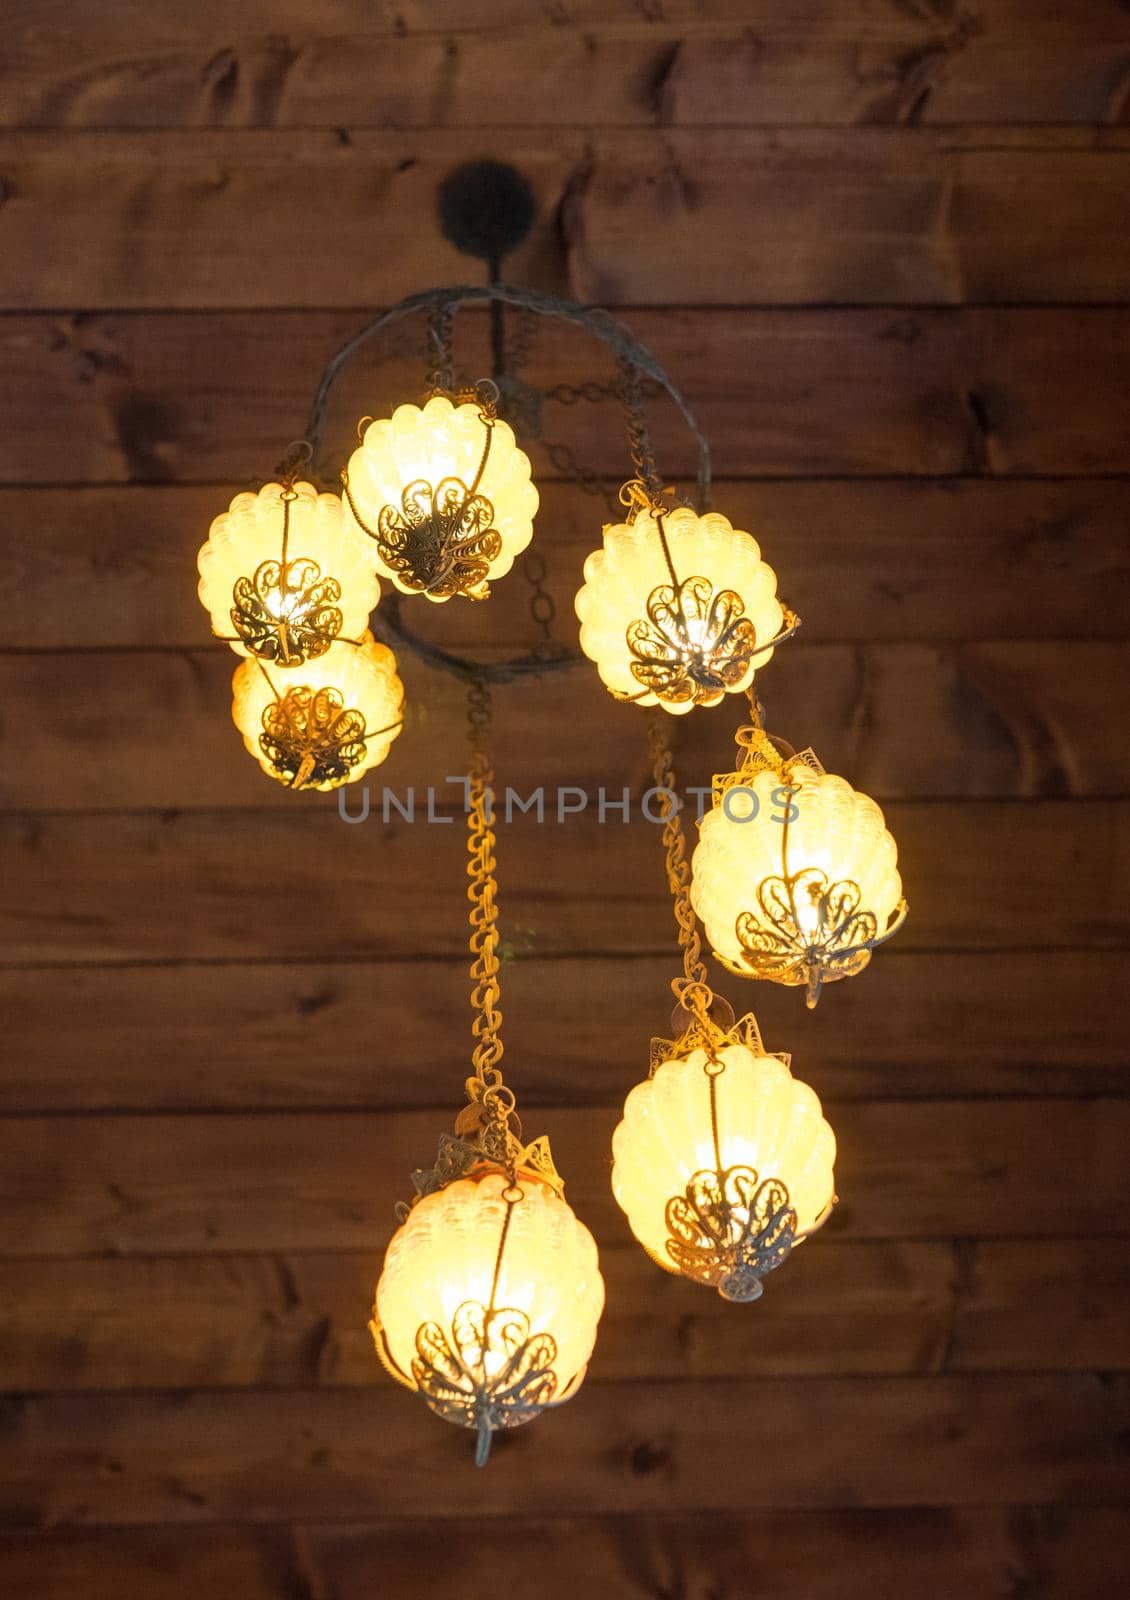 beautiful lamp in vintage style on the background of a wooden ceiling